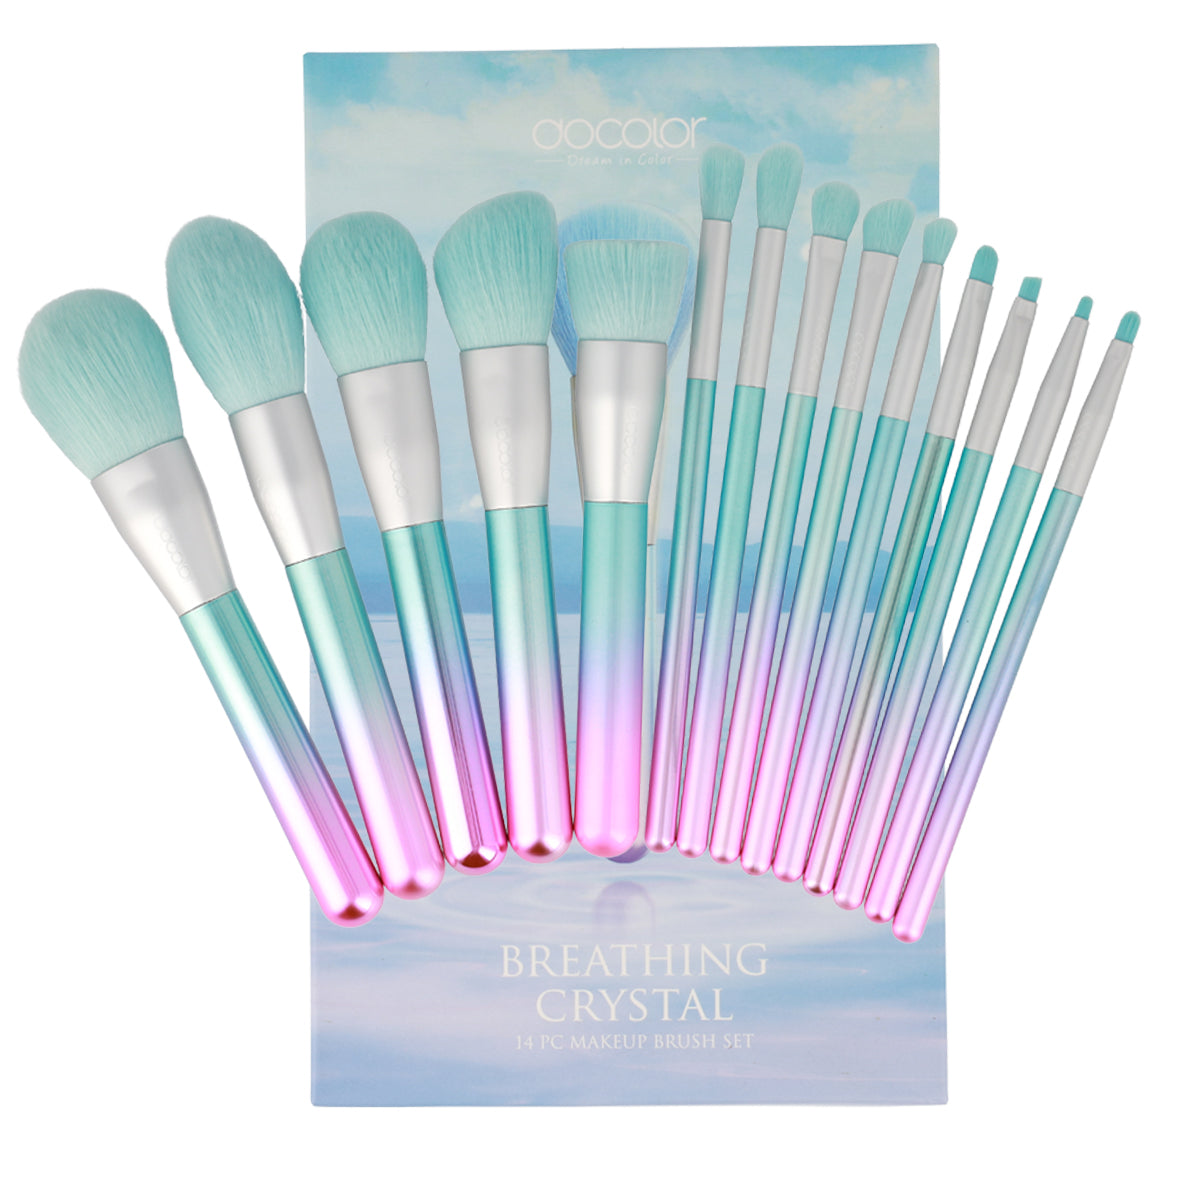 Docolor 14  pieces Breathing Crystal Makeup Brush Set